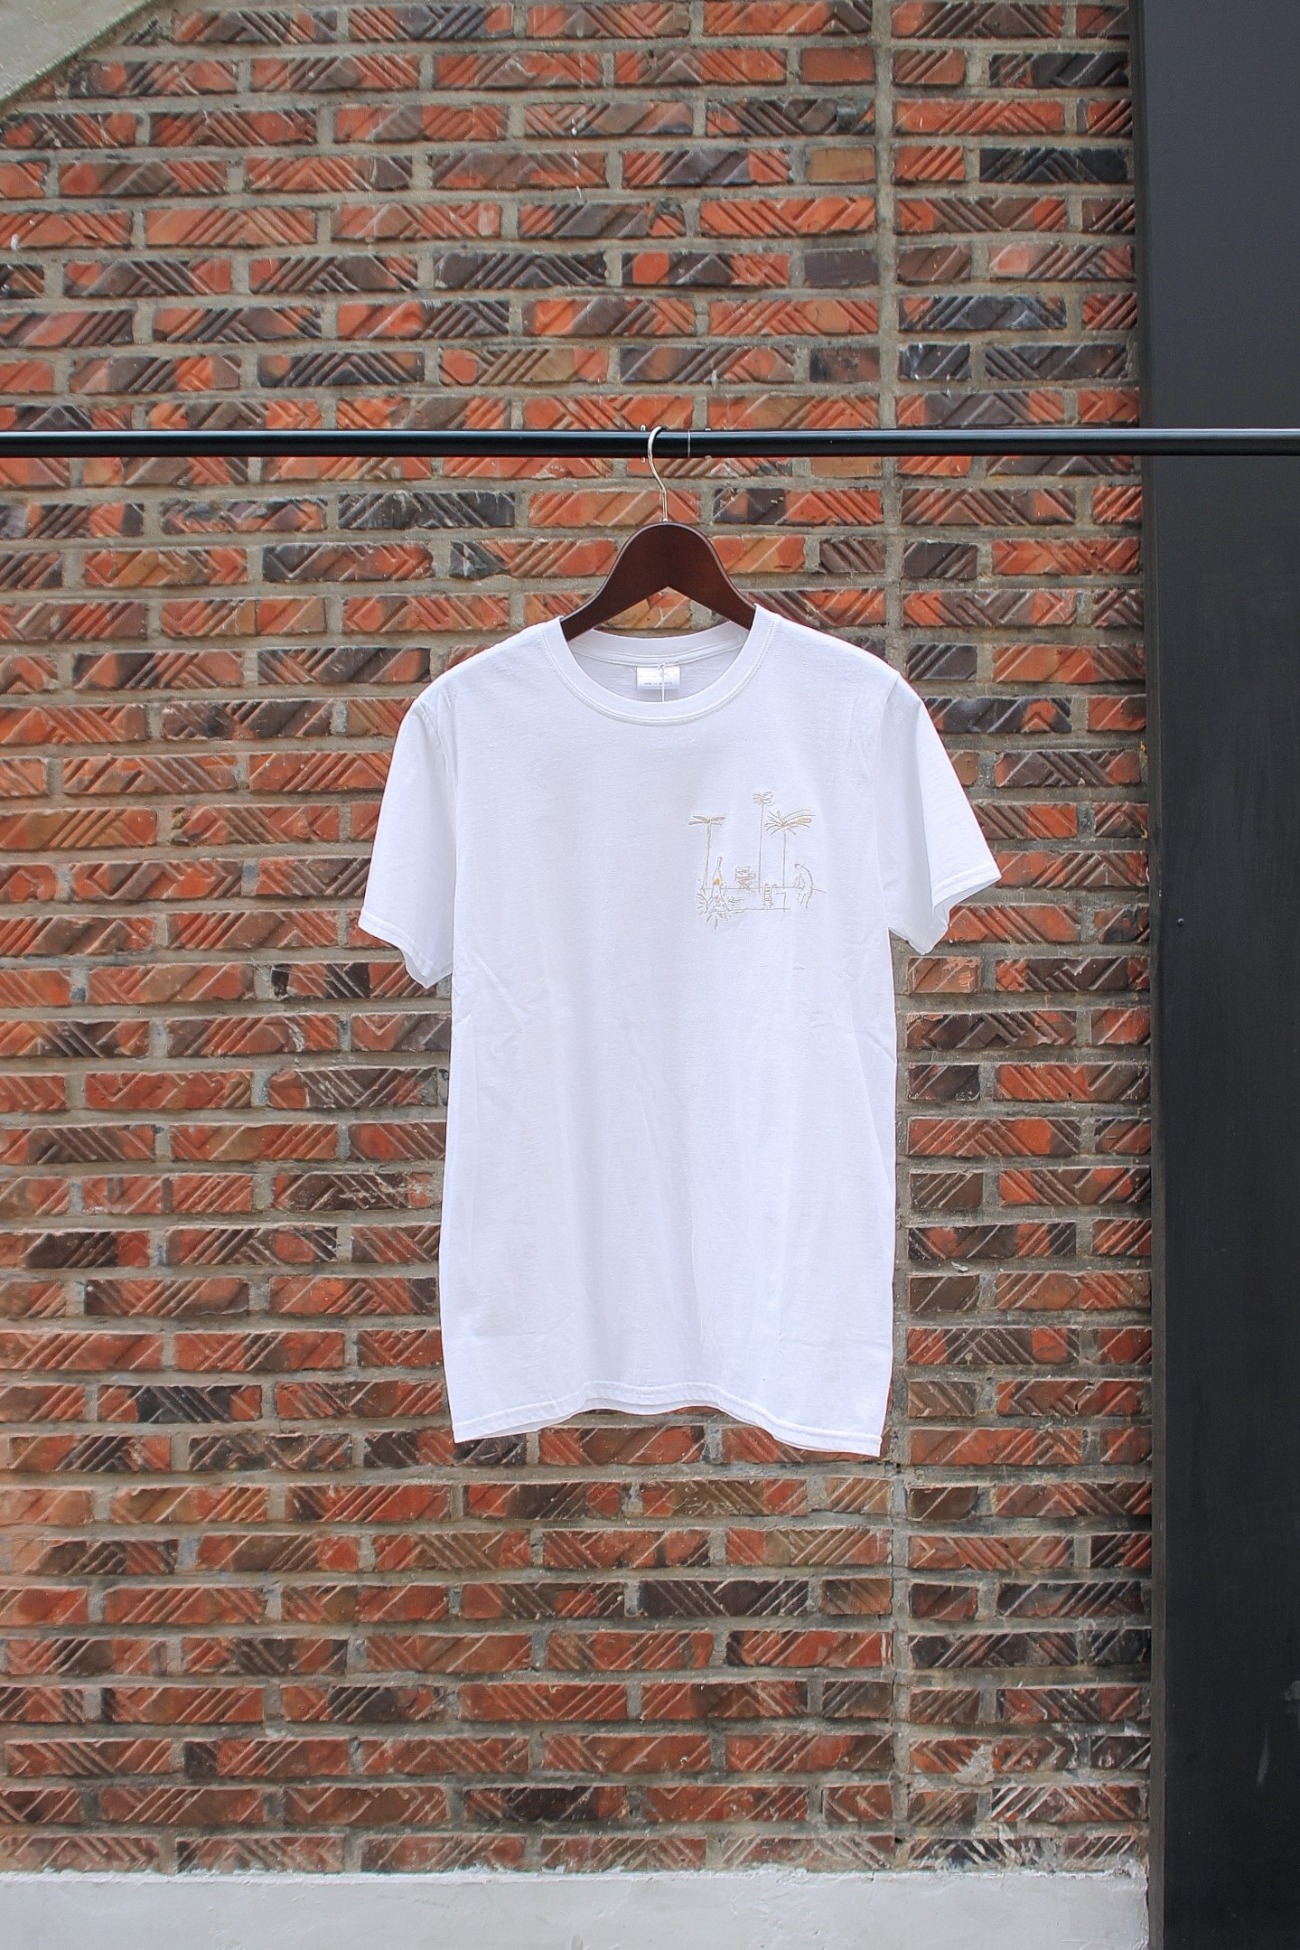 [Hien Le] Embroidered Pool Party Tee - White